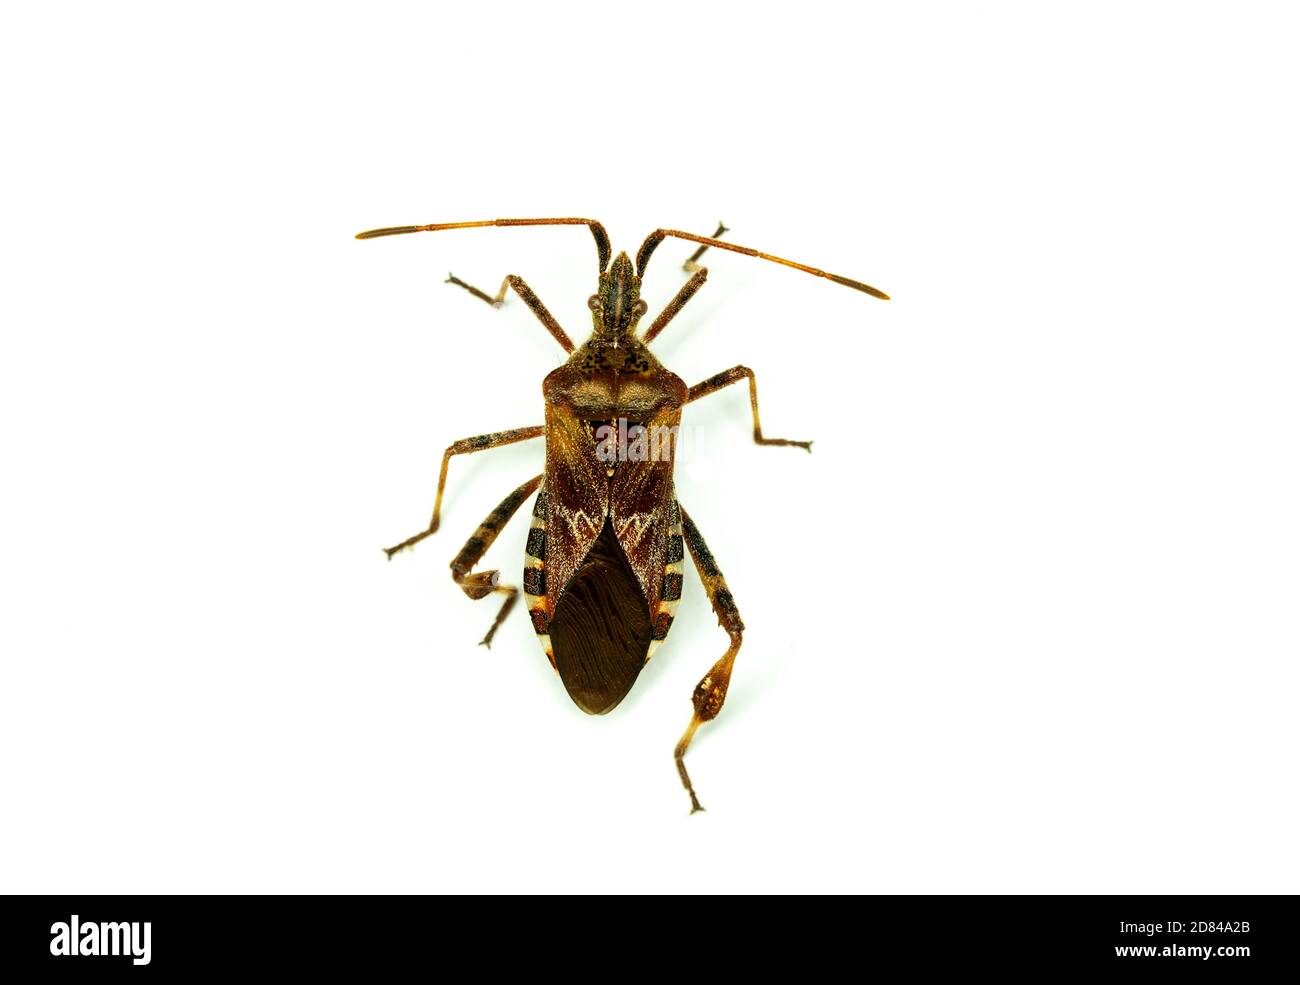 Western conifer seed bug Leptoglossus occidentalis in top view isolated on white background. Amerikanische Kiefernwanze, Zapfenwanze Stock Photo